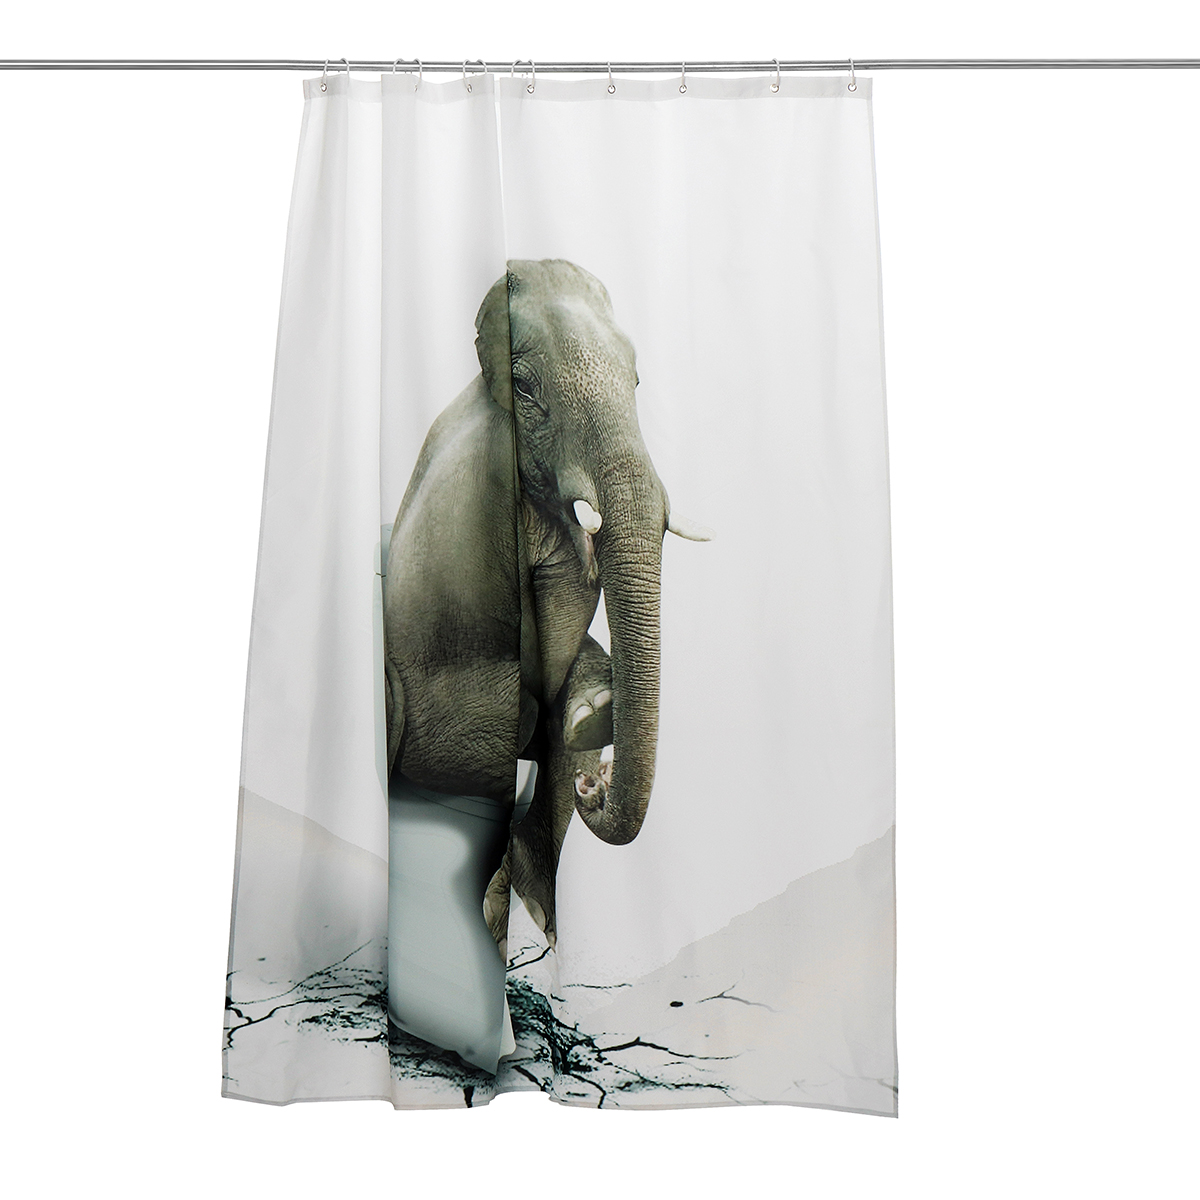 Waterproof 71"x71" Elephant Shower Curtain Bathroom Set Fabric Polyester + 12 Hooks Rings Home Decor Christmas Gift - image 2 of 5